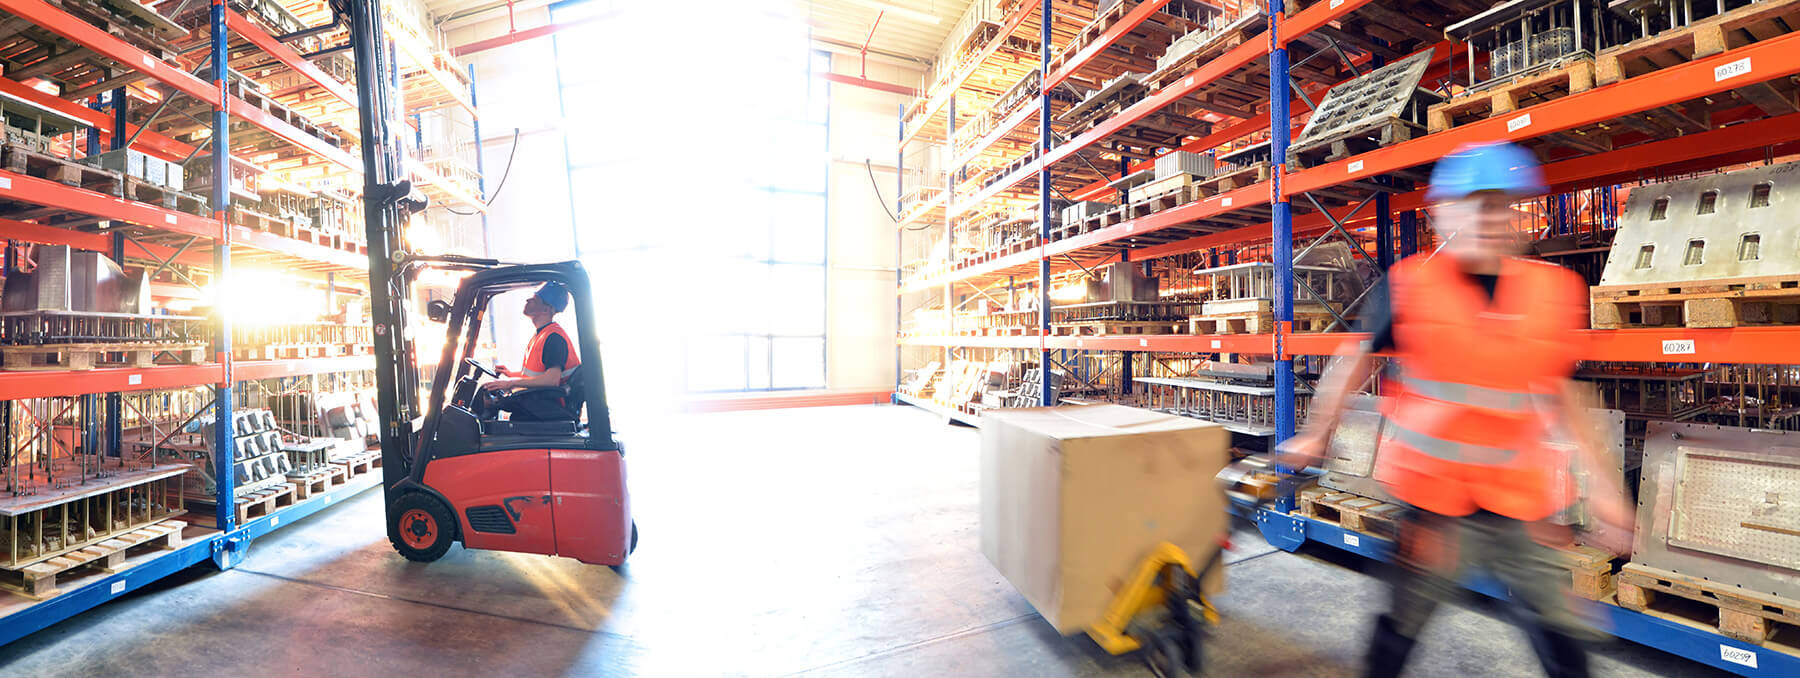 Softeon Upgrades Warehouse Management System with New Capabilities